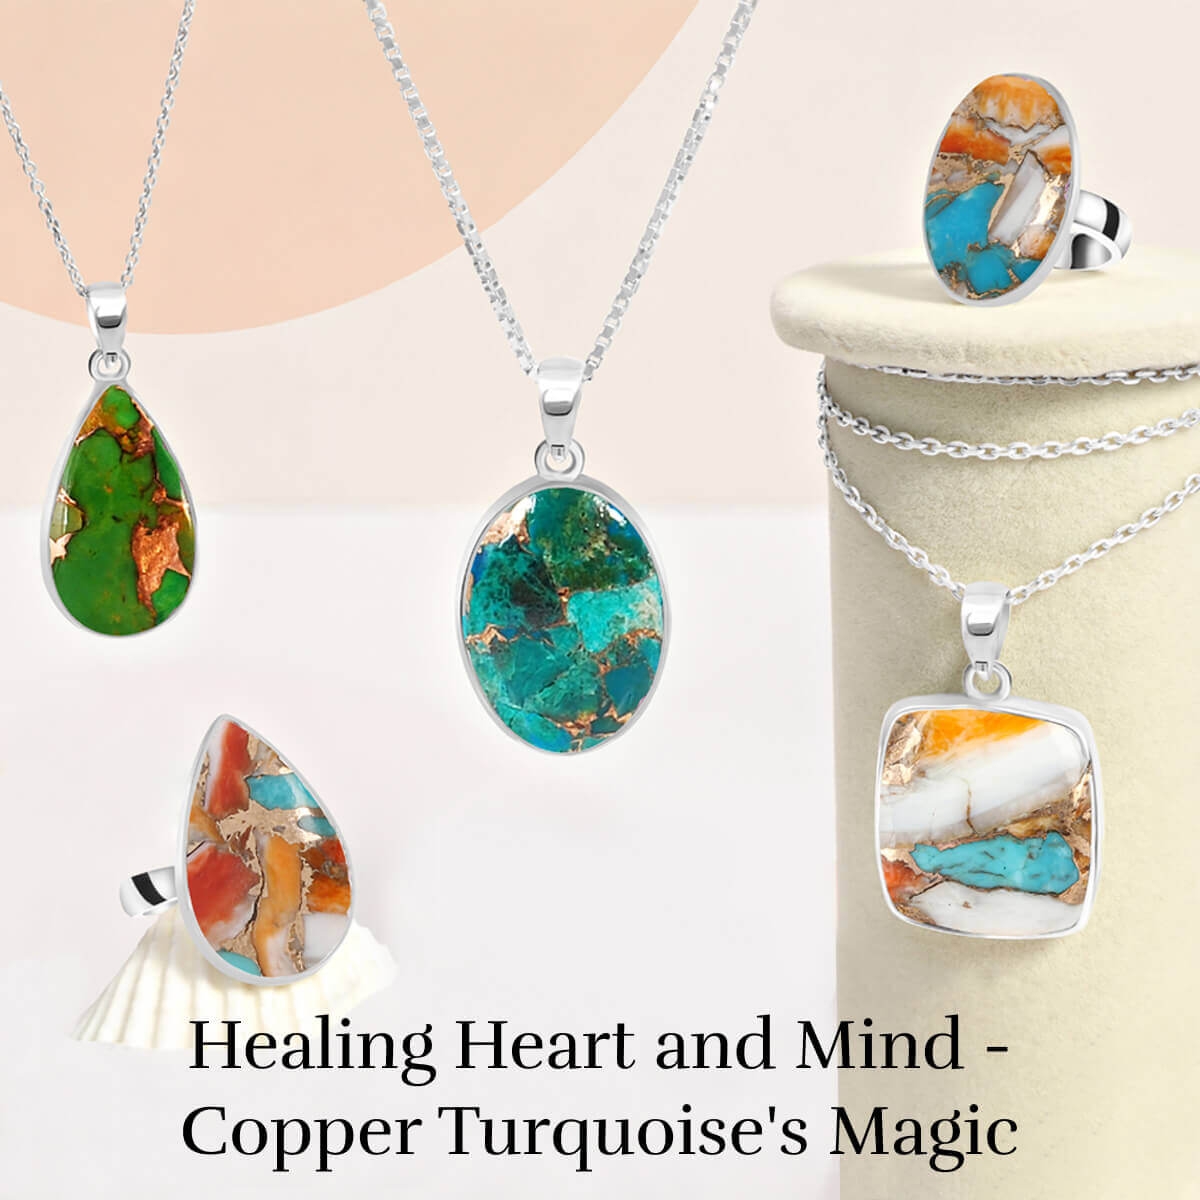 Copper Turquoise: Emotional Healing properties